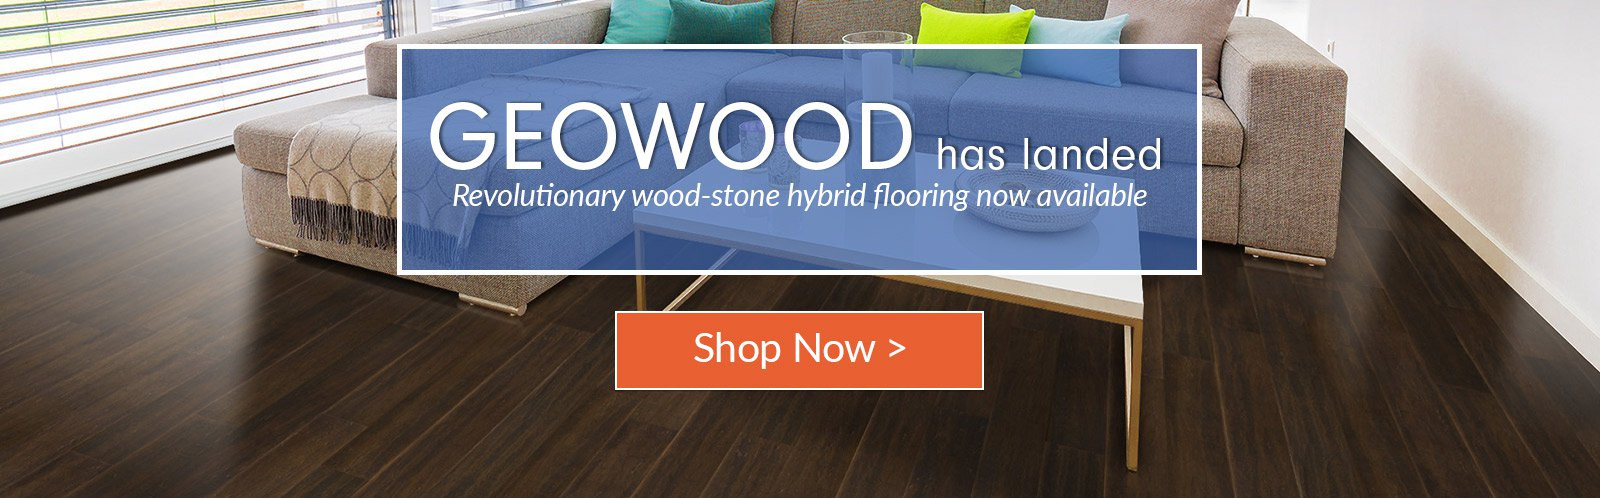 27 Lovely Hardwood Floor Installation Cost Denver 2024 free download hardwood floor installation cost denver of green building construction materials and home decor cali bamboo with geowood launch homepage slider